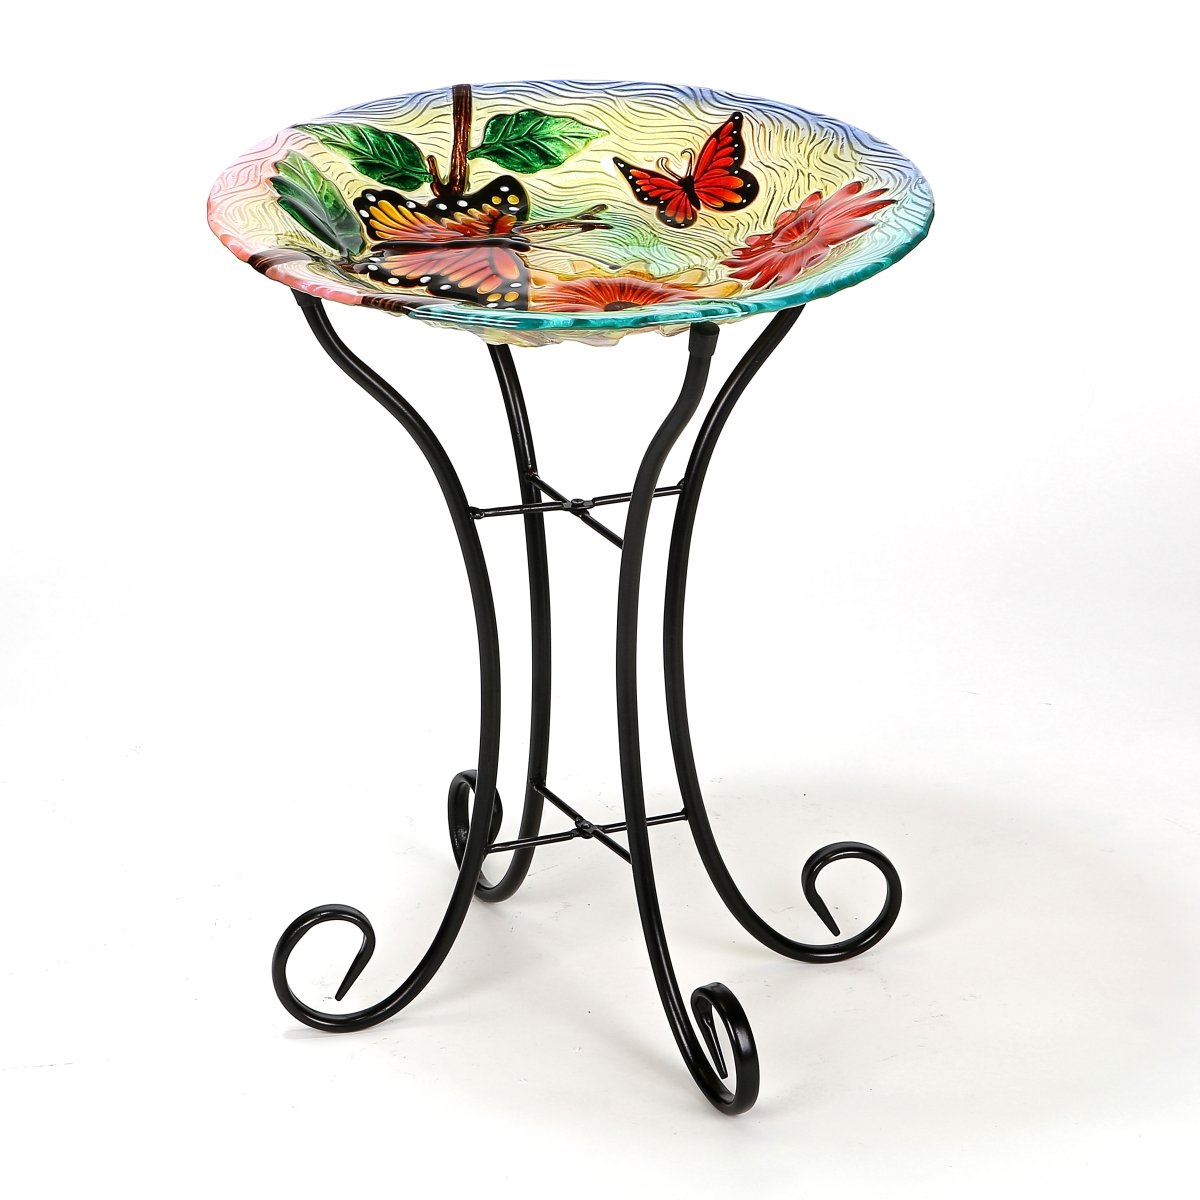 Wh119 Butterflies With Flowers Bird Bath With Stand